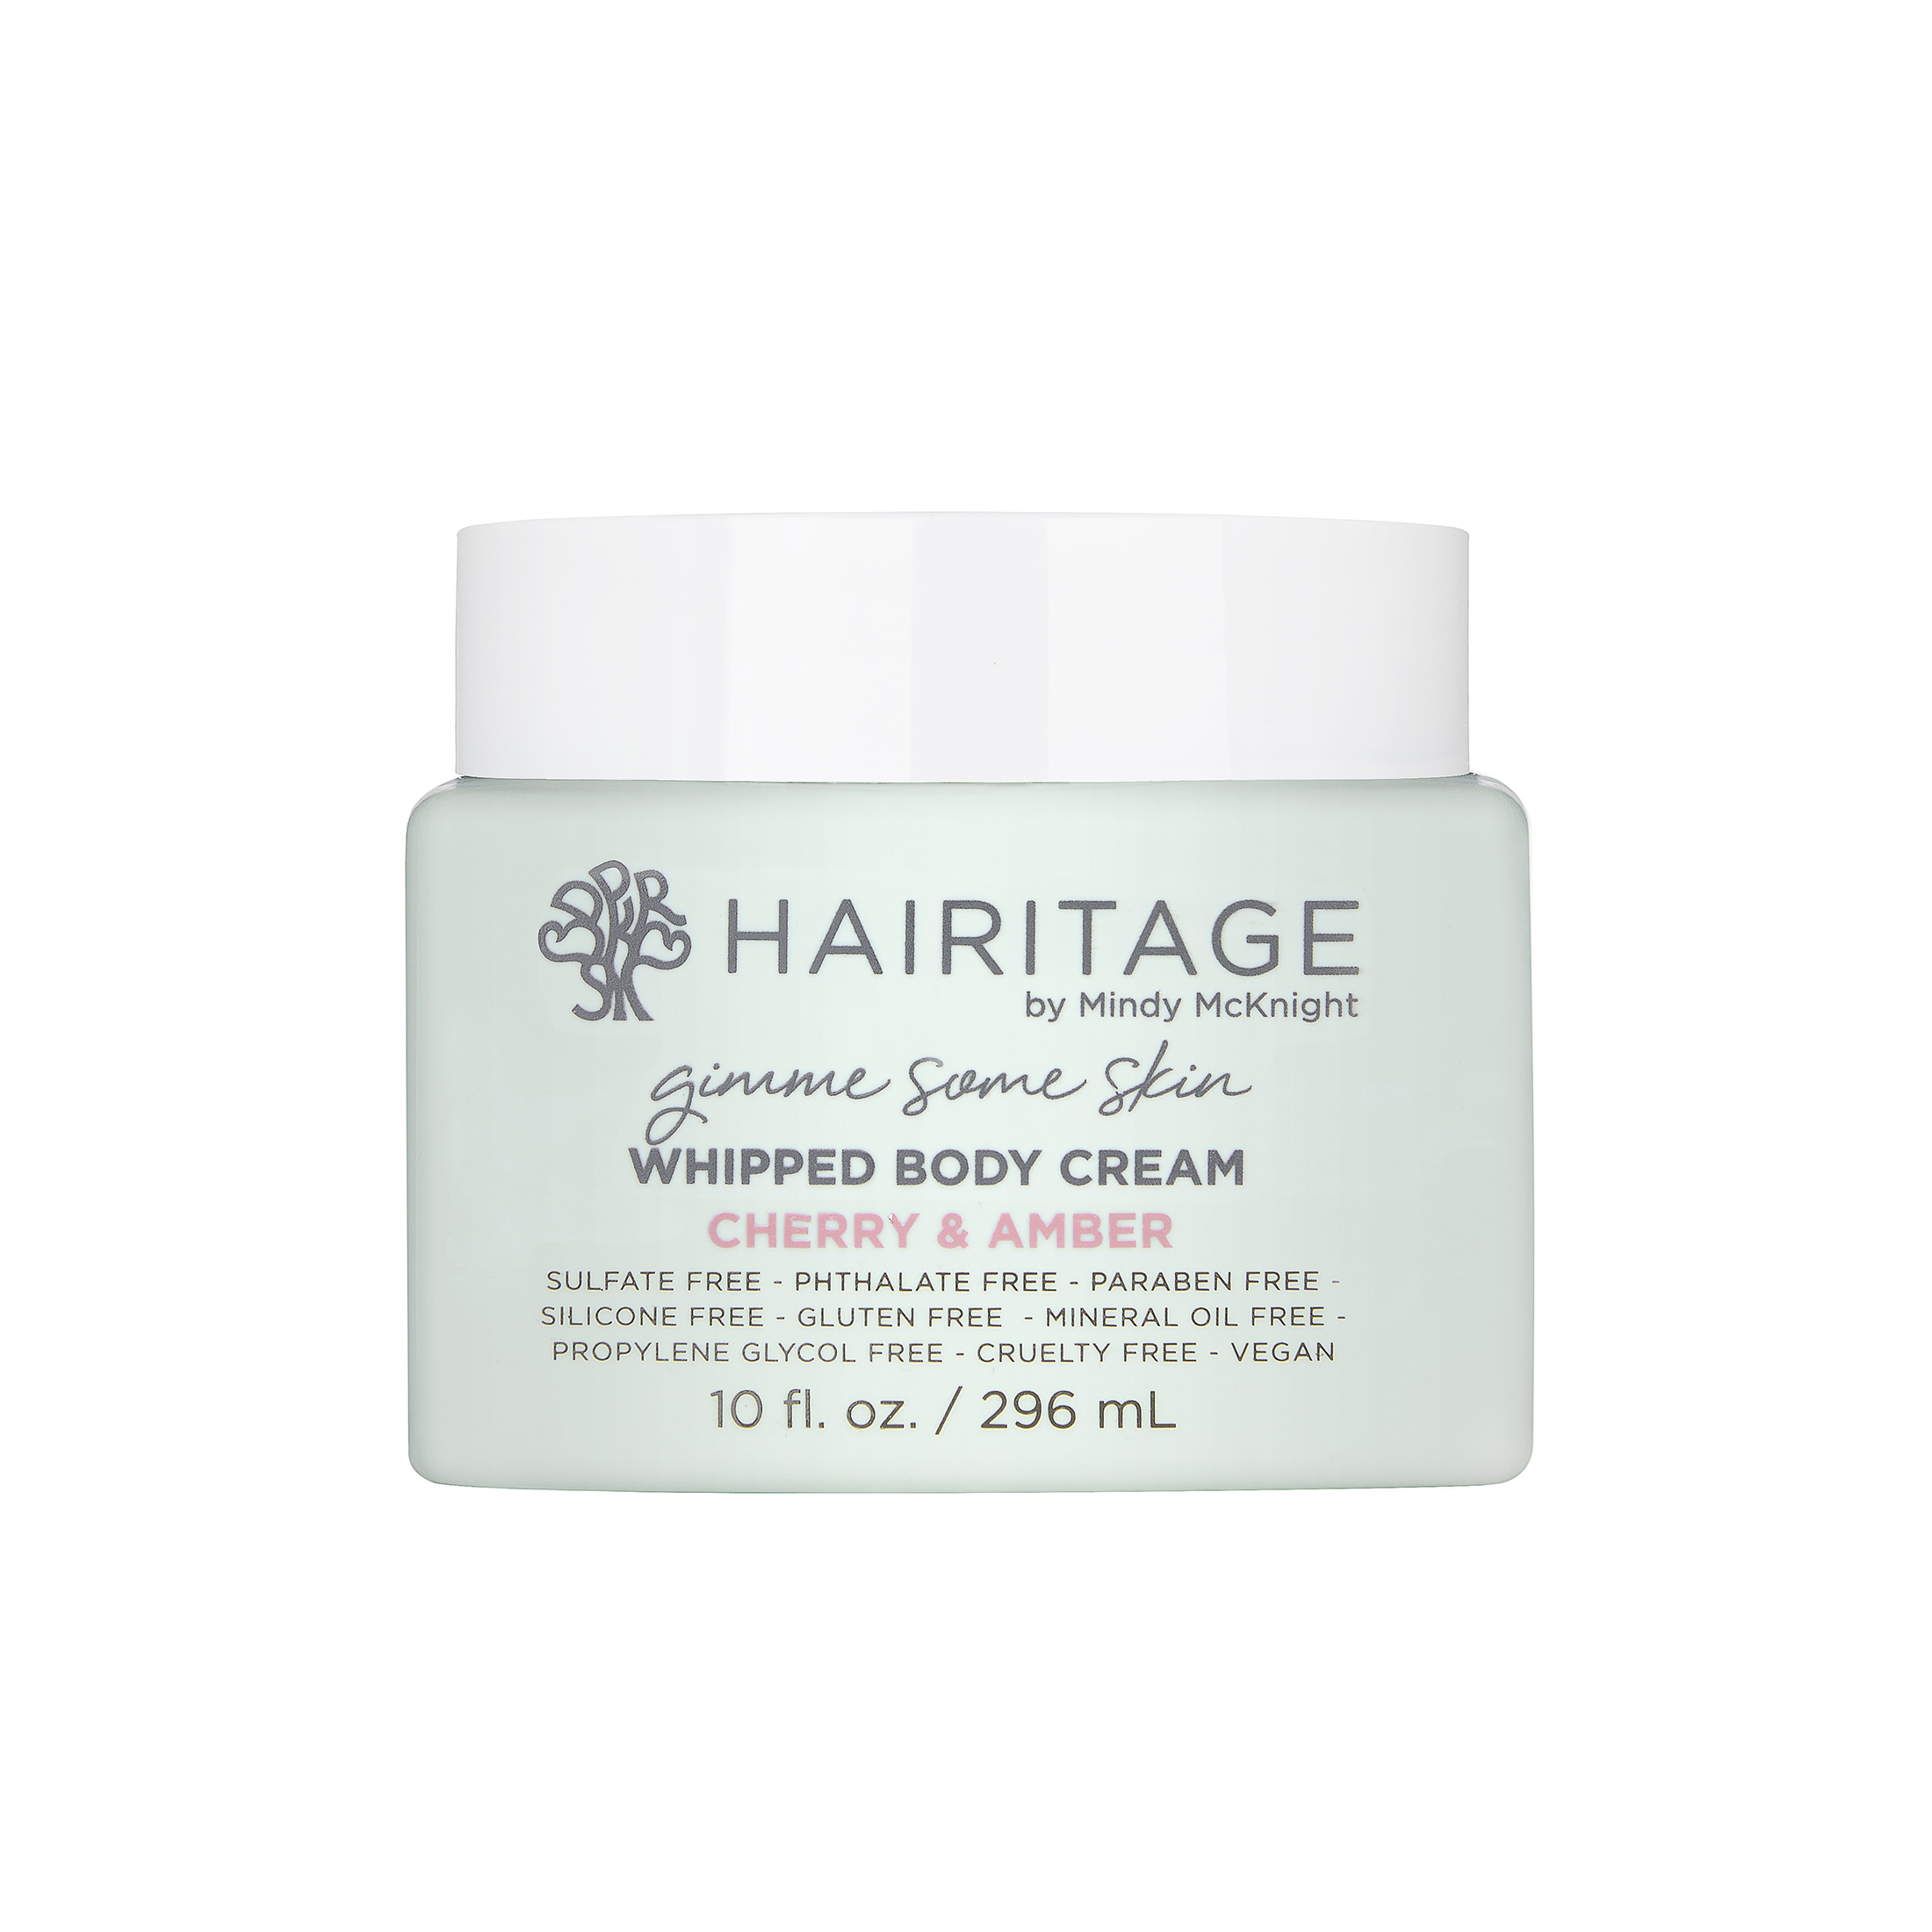 Hairitage Gimme Some Skin Cherry & Amber Scented Whipped Body Cream | Shea Butter, Niacinamide & Coconut Oil for All Skin Types | Vetiver & Guaiac Wood Essential Oils, 10 fl. oz - image 1 of 8